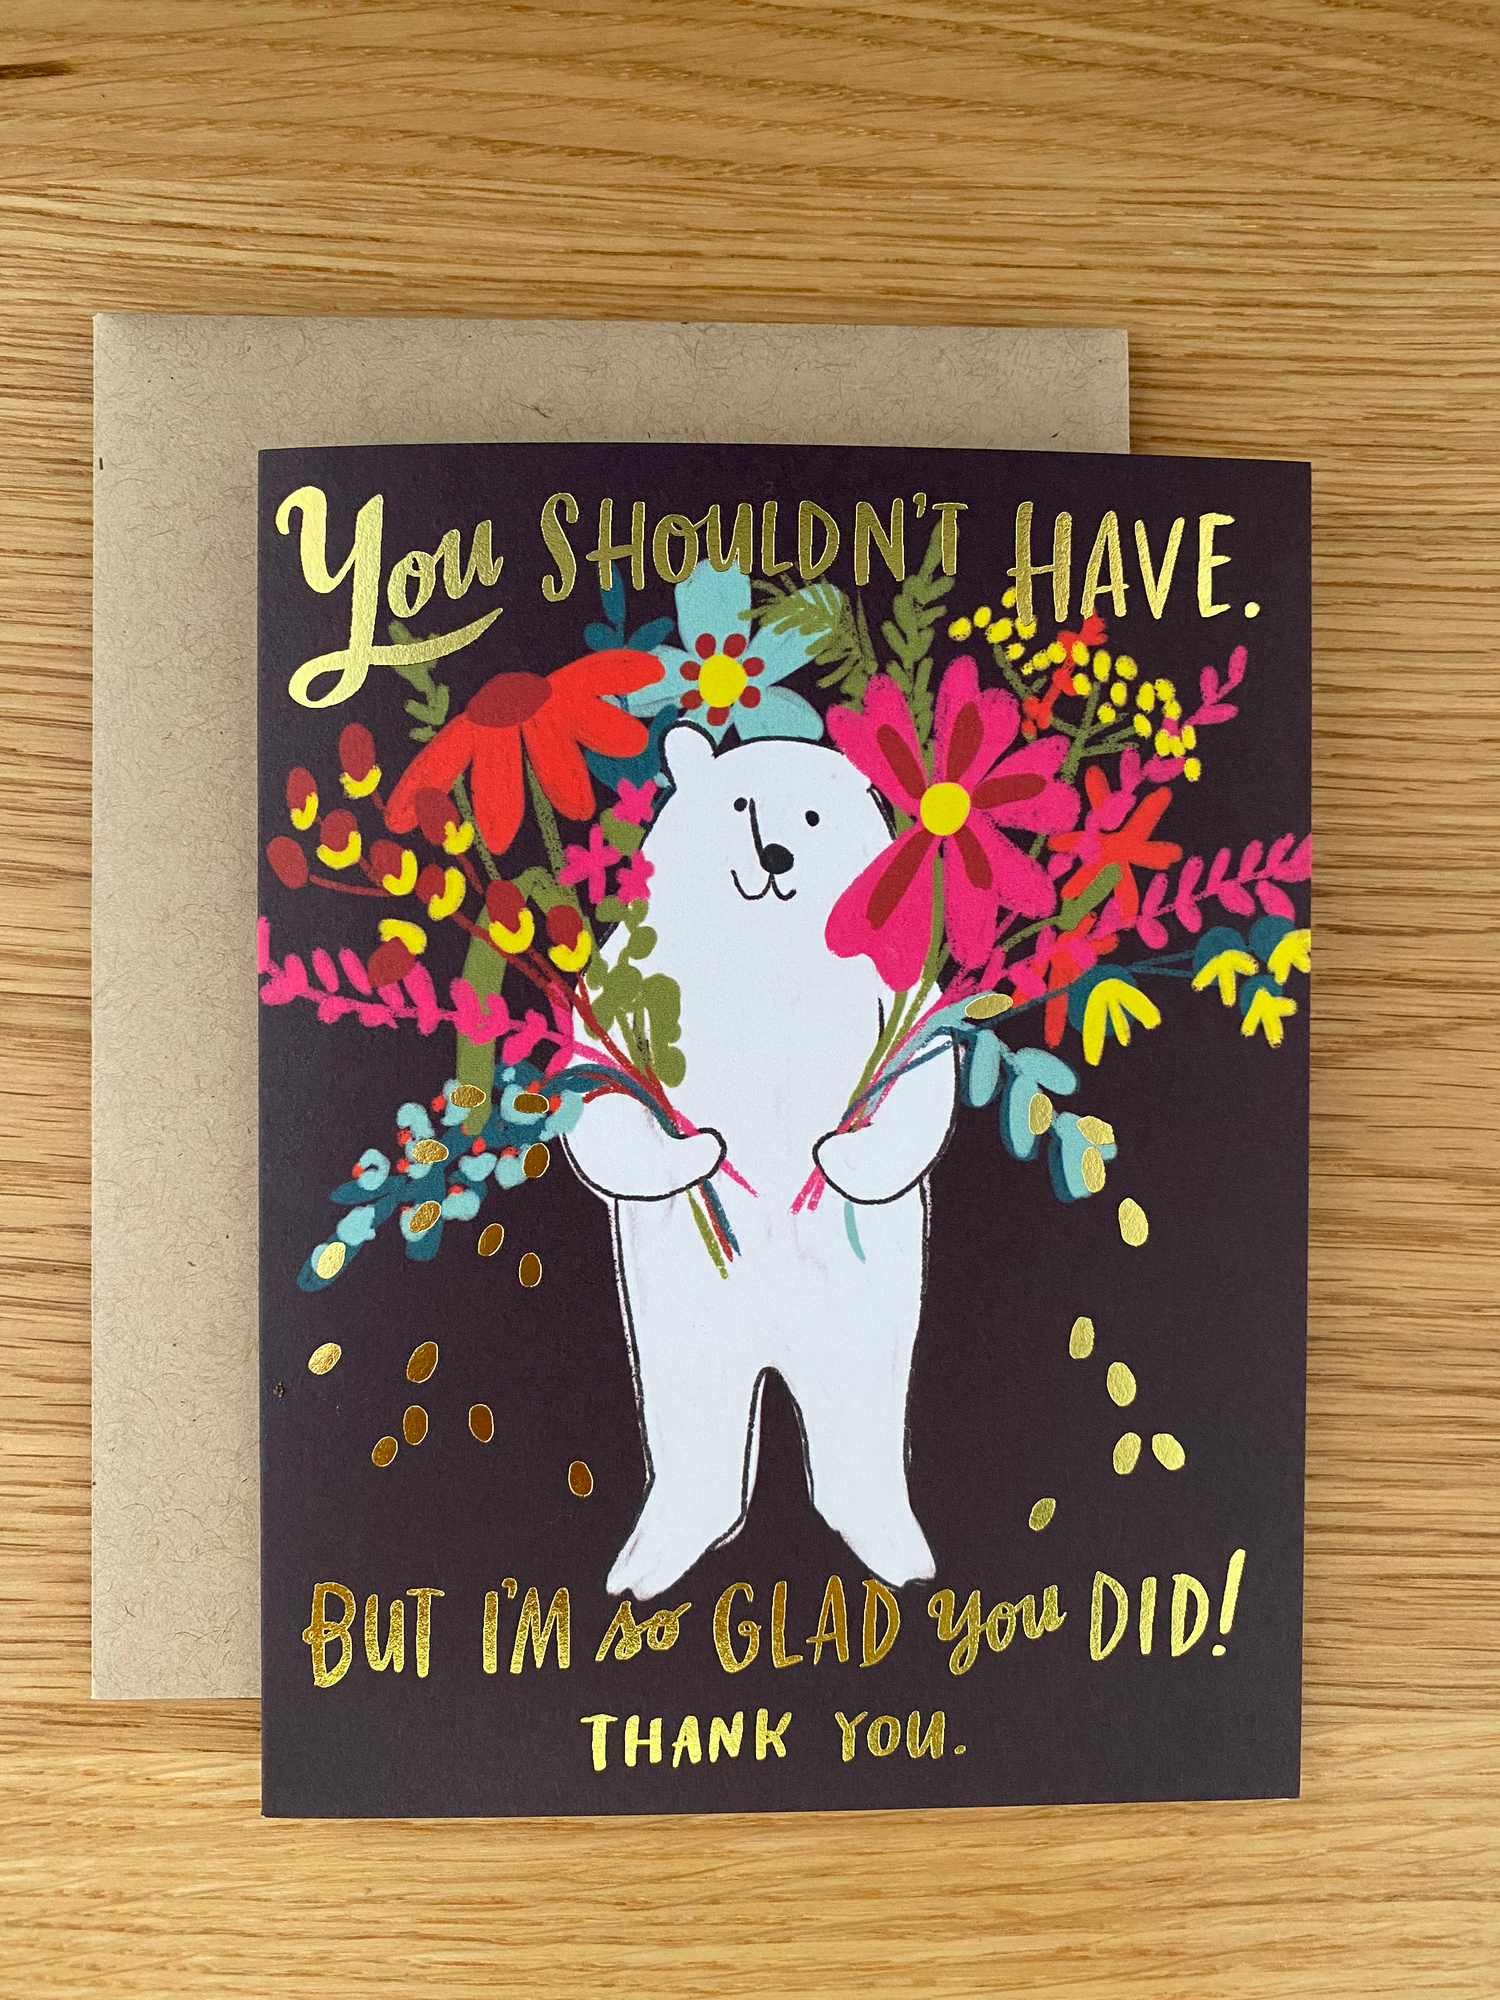 Bear Bouquet Thank you card reading" You shouldn't have, but I'm glad you did!" by Emily McDowell